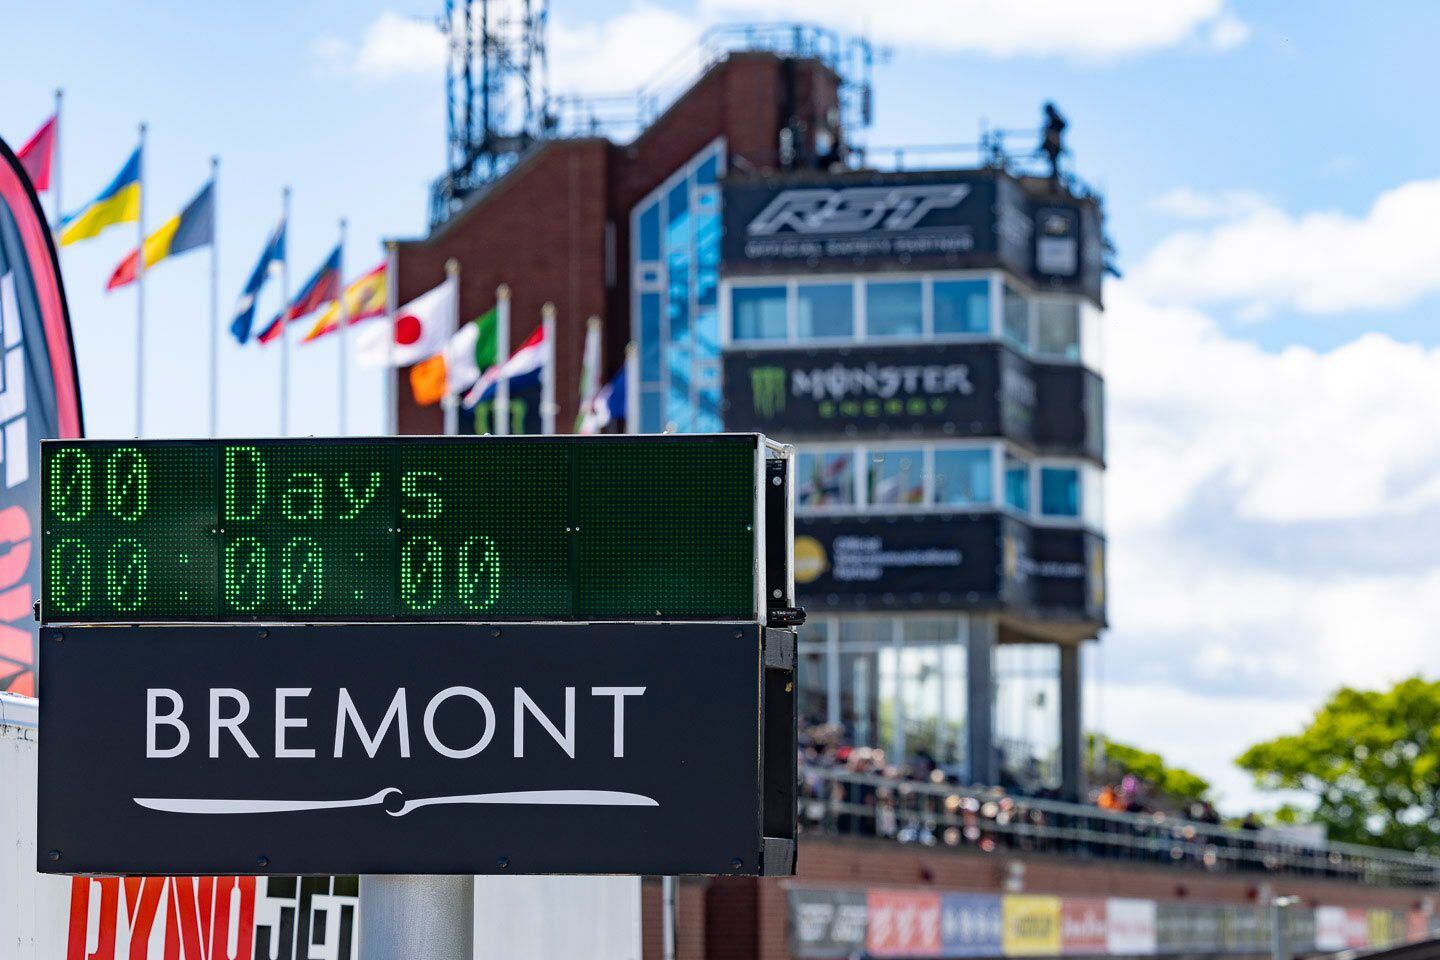 The time that everyone has been waiting for: The Isle Man TT countdown clock has finally reached 0:00.00. Engines are roaring on the grid as riders get ready to head down Glencrutchery Lane and Bray Hill.